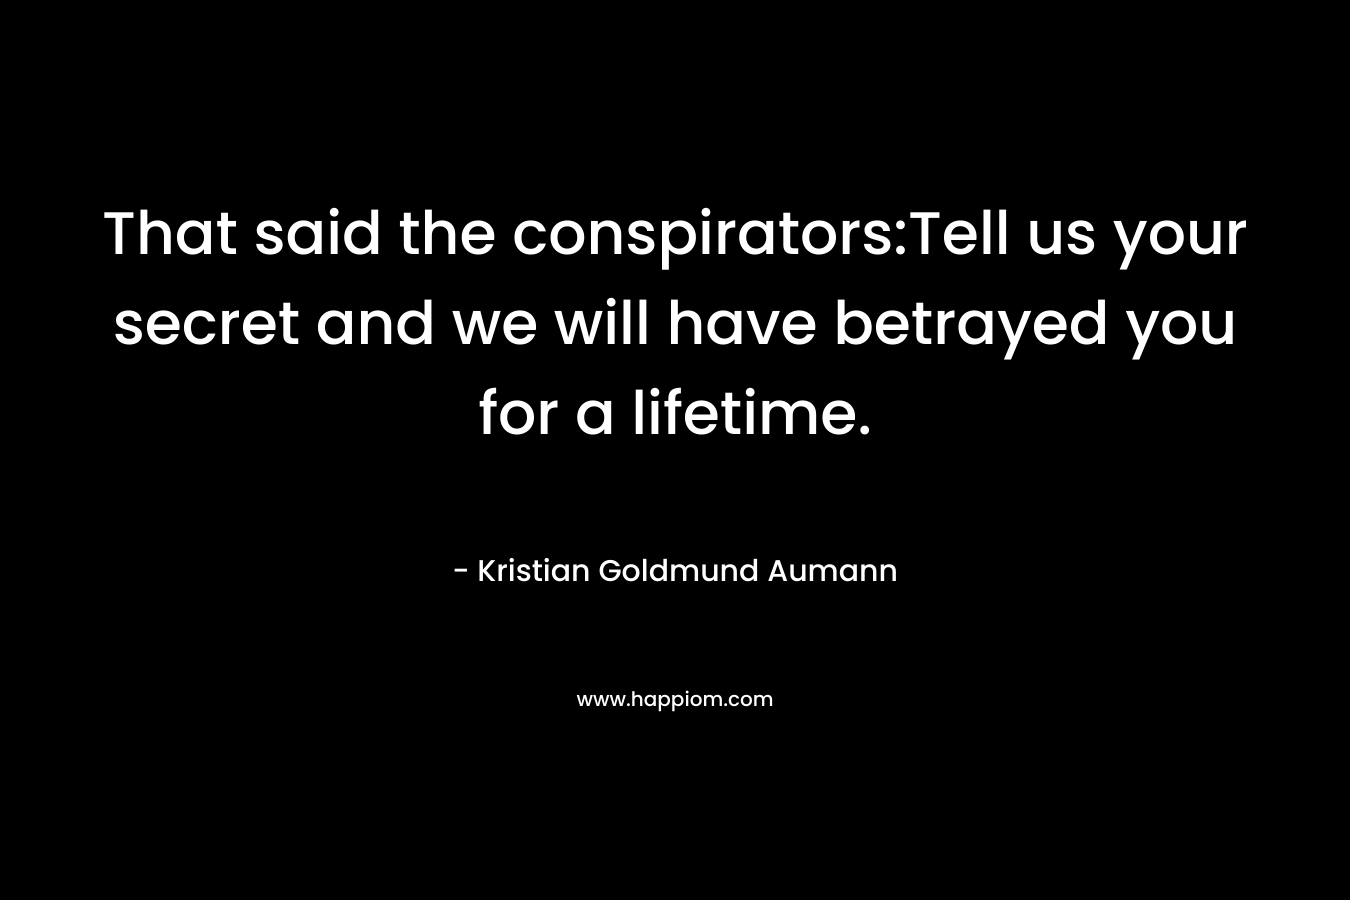 That said the conspirators:Tell us your secret and we will have betrayed you for a lifetime.